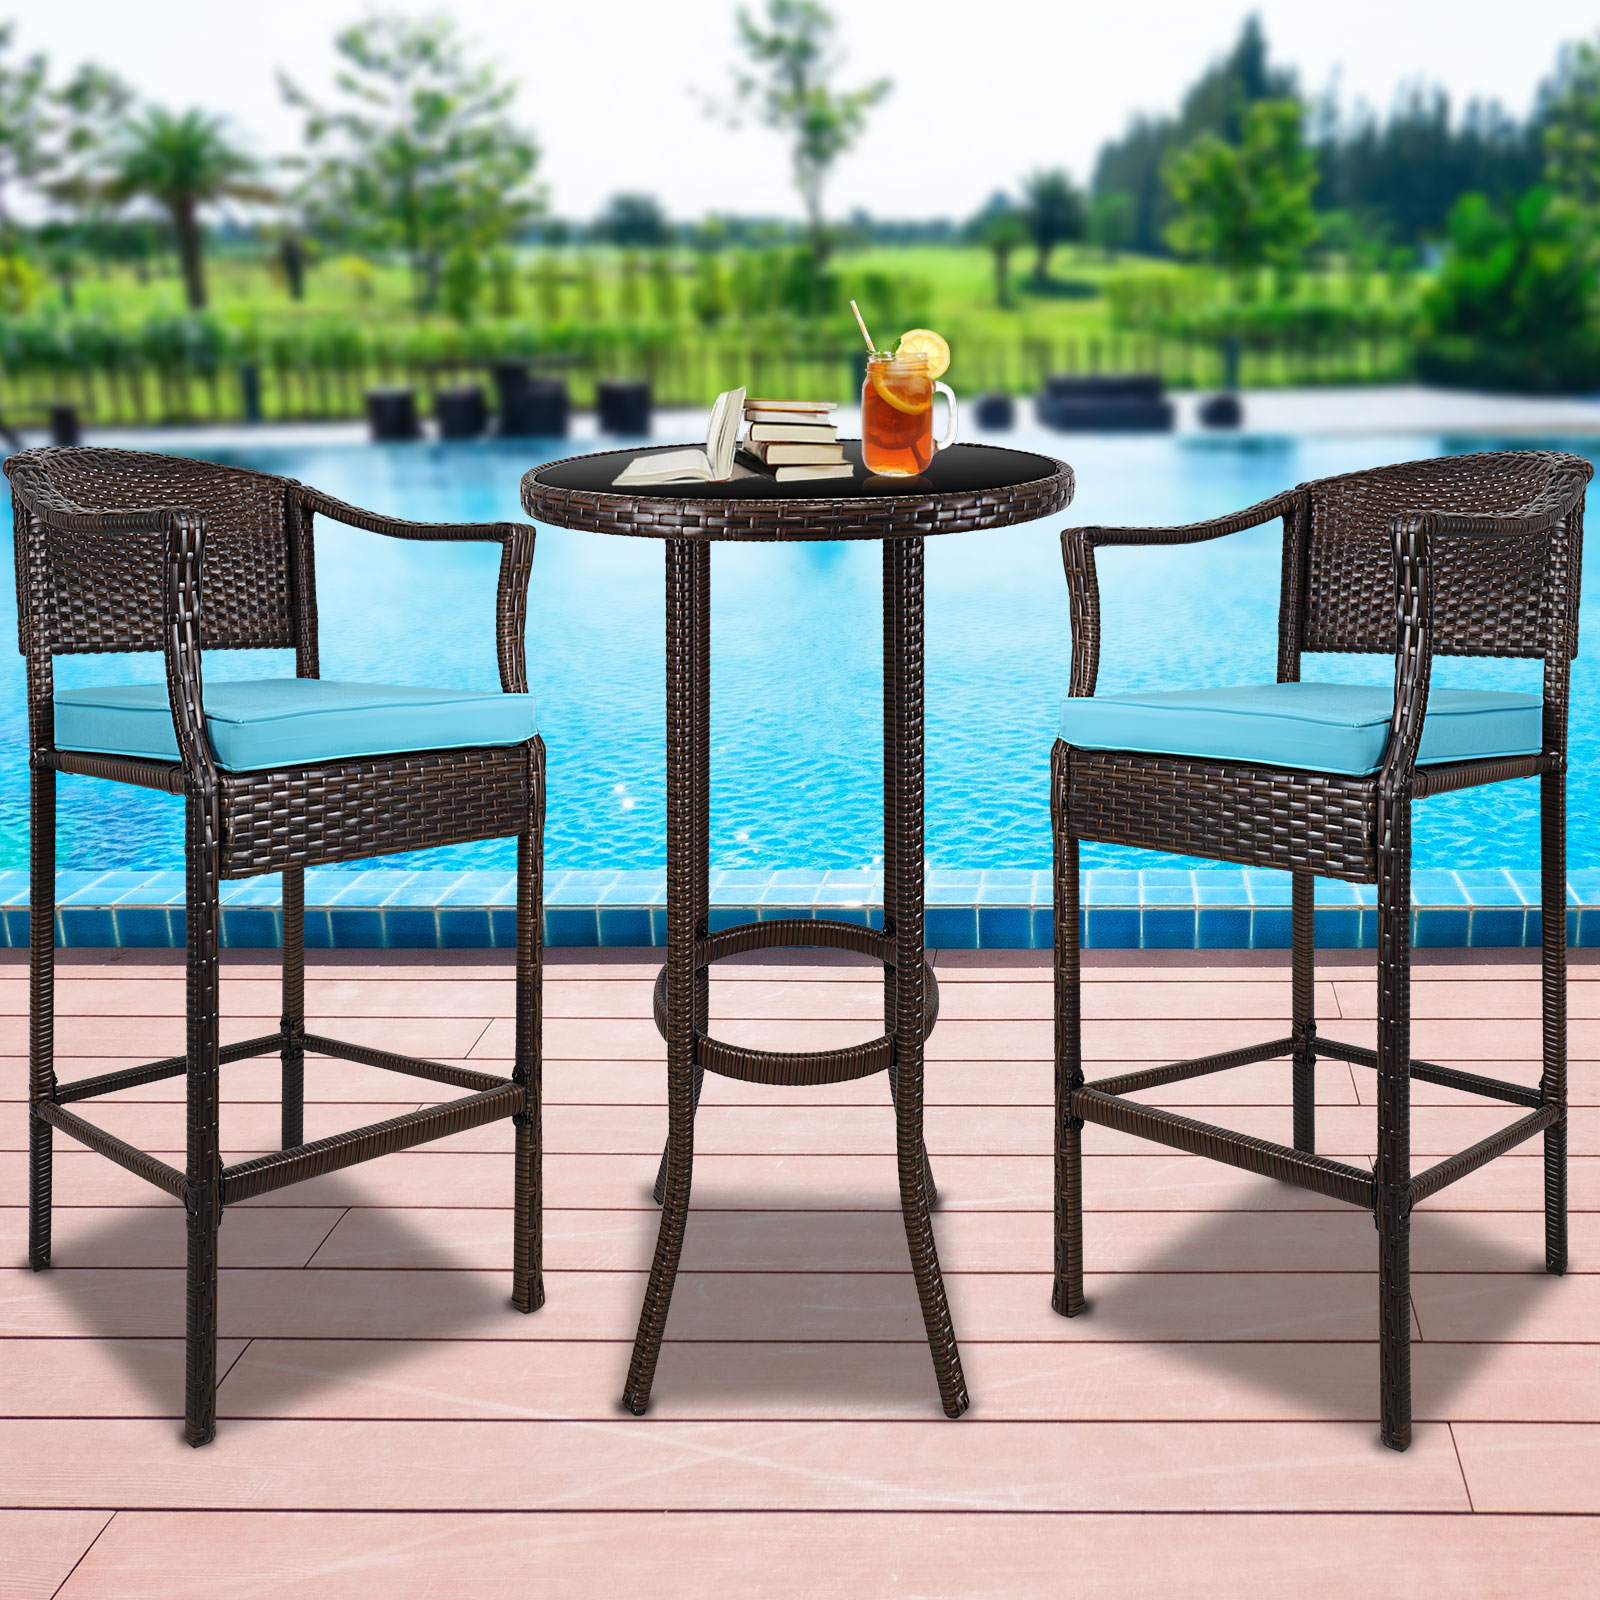 Syngar Patio Bistro Set, 3 Piece Outdoor Bar Table and Stools Set, 2 Patio Cushioned Bar Chairs with 1 High Glass Top Table, All Weather PE Rattan Furniture Set for Garden Yard Balcony Pool Cafe, B13 - image 2 of 10